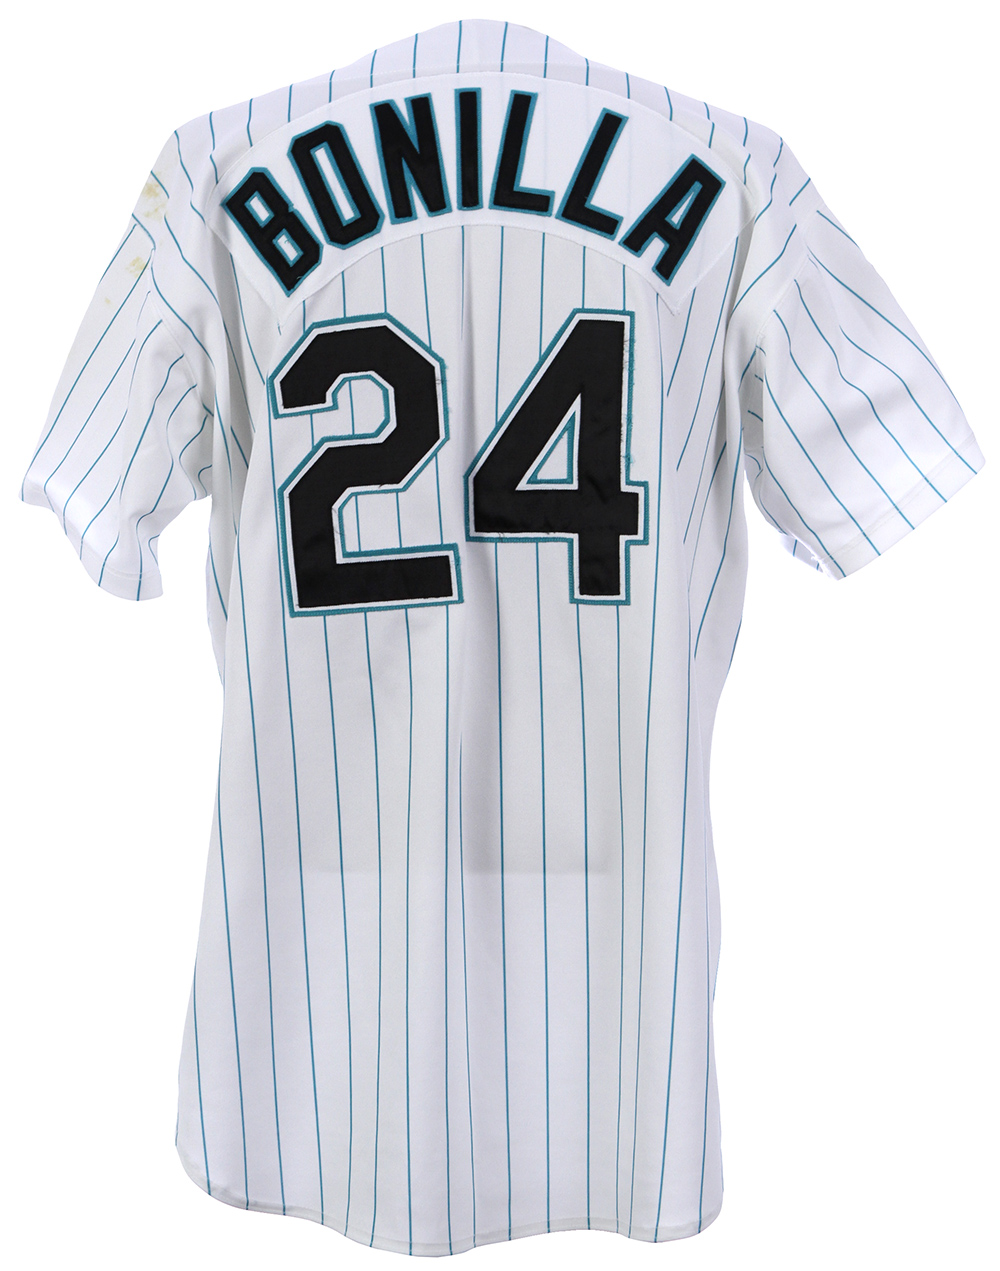 Sold at Auction: 1997 Bobby Bonilla Game Worn Florida Marlins Jersey. With  Jackie Robinson Breaking Barriers 50th Anniversary Patch. From The Year  Florida Won It All! Ex. Mears Auction.